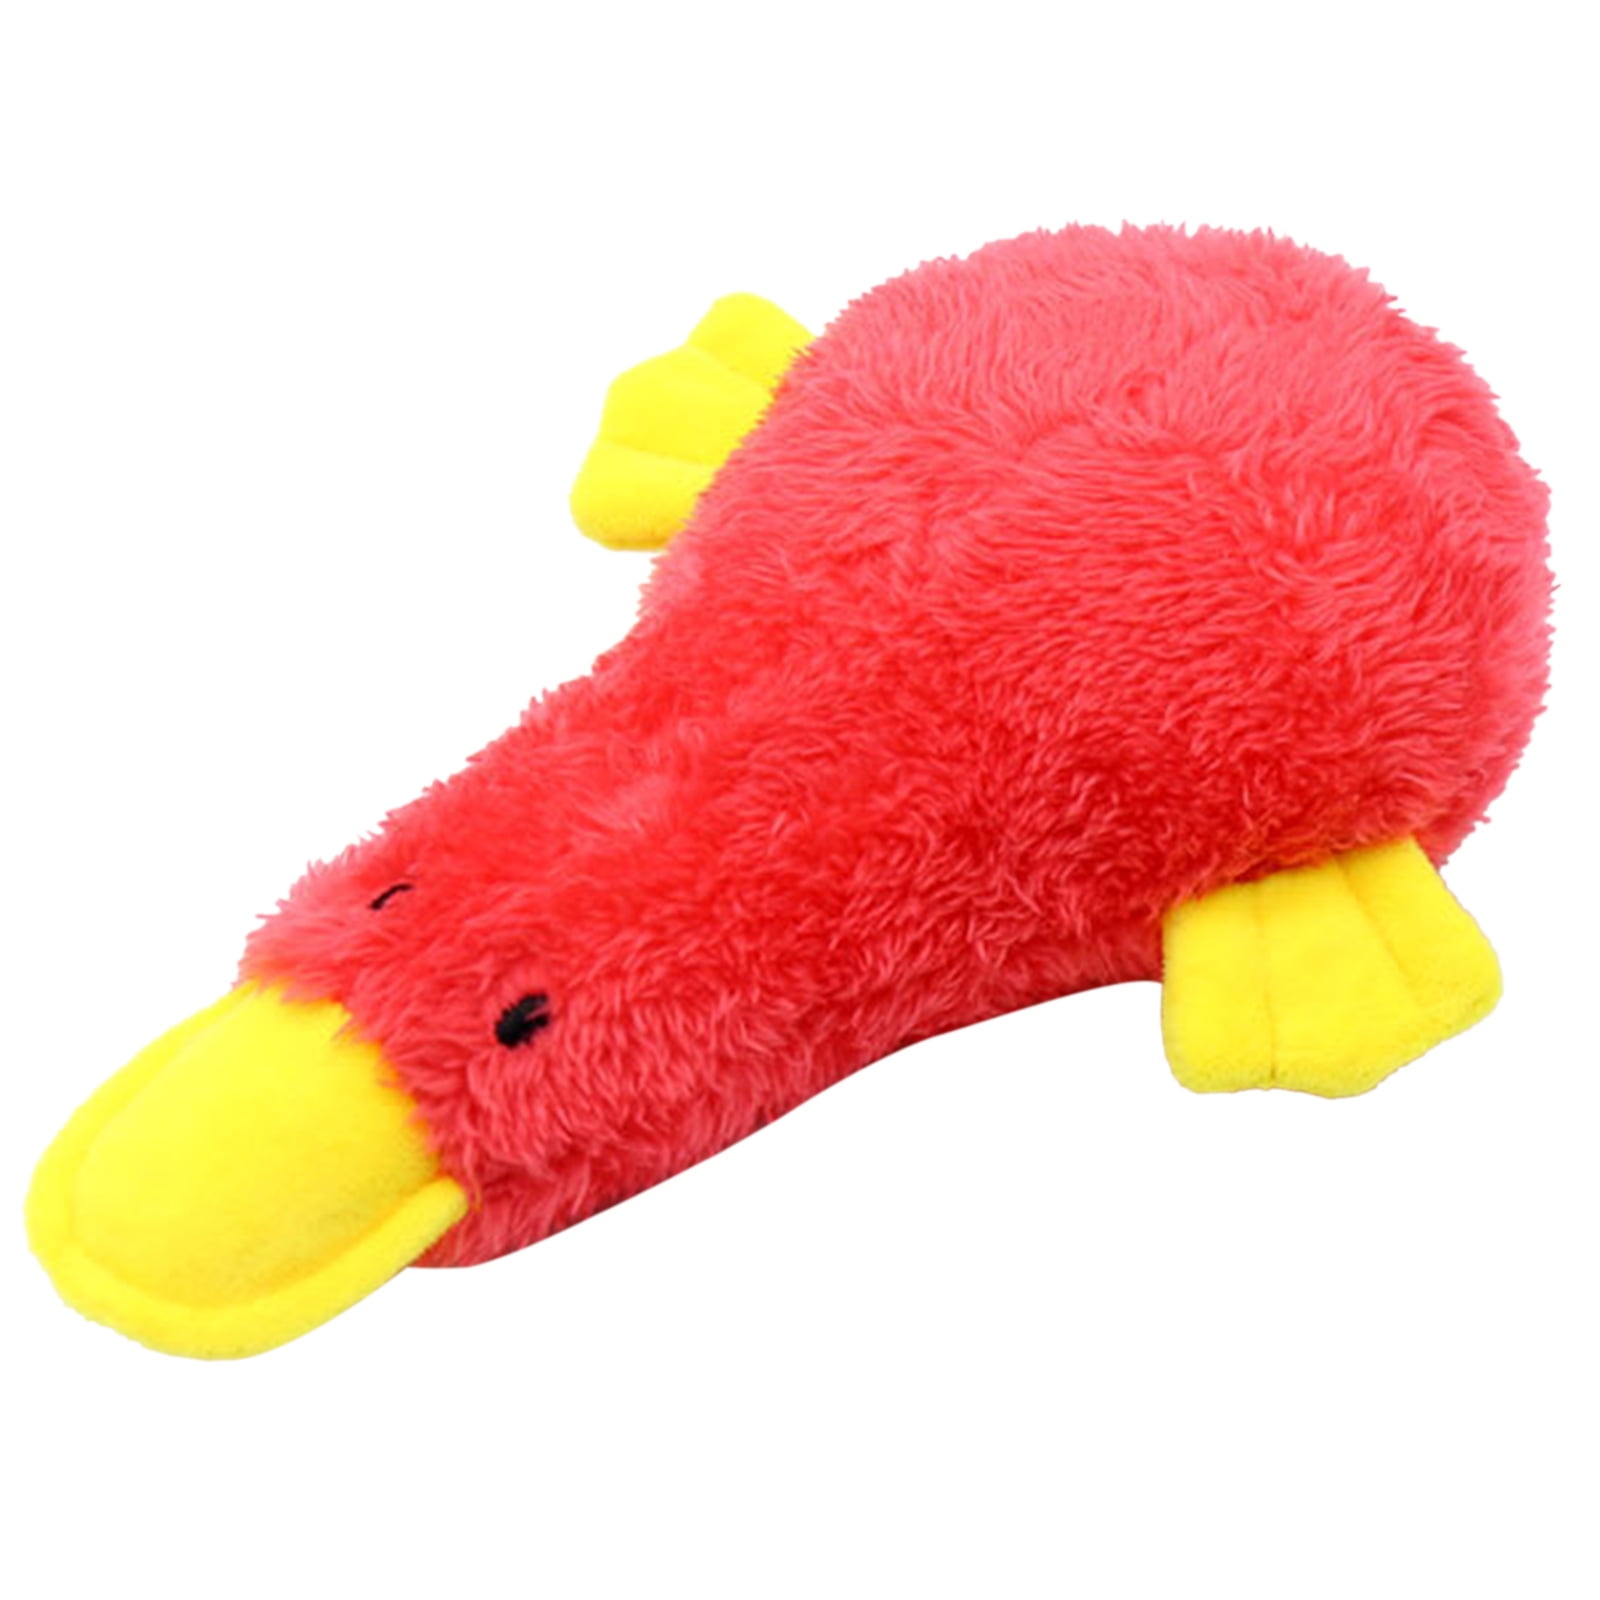 YYDSFEIOU Stuffed Dog Toys for Medium Dogs, Interactive Squeaky